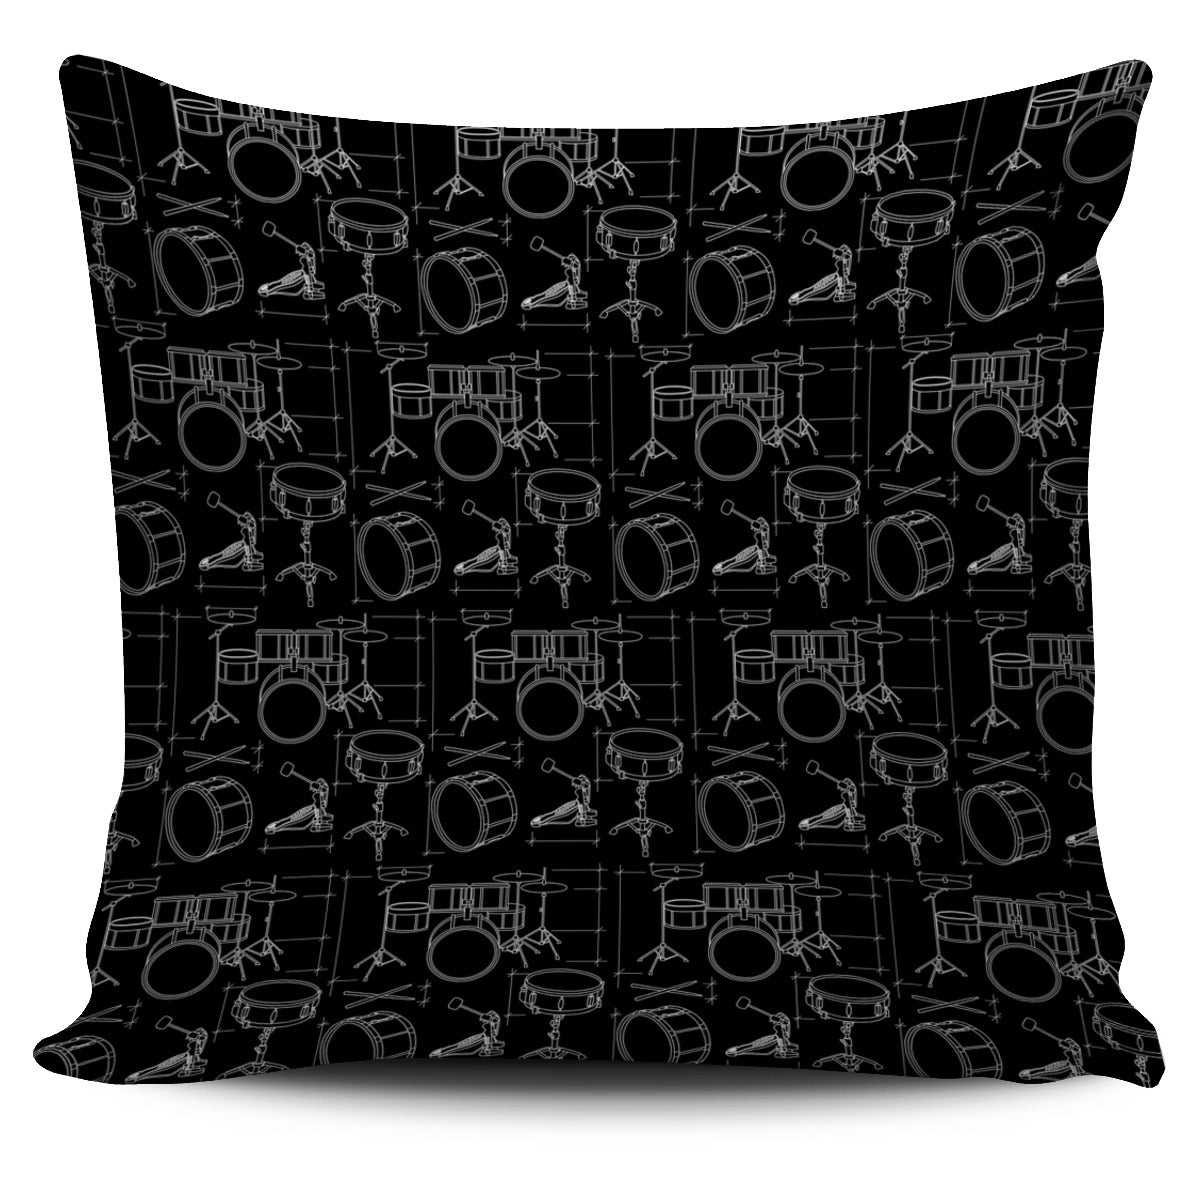 Technical Drums Black Pillow Cover